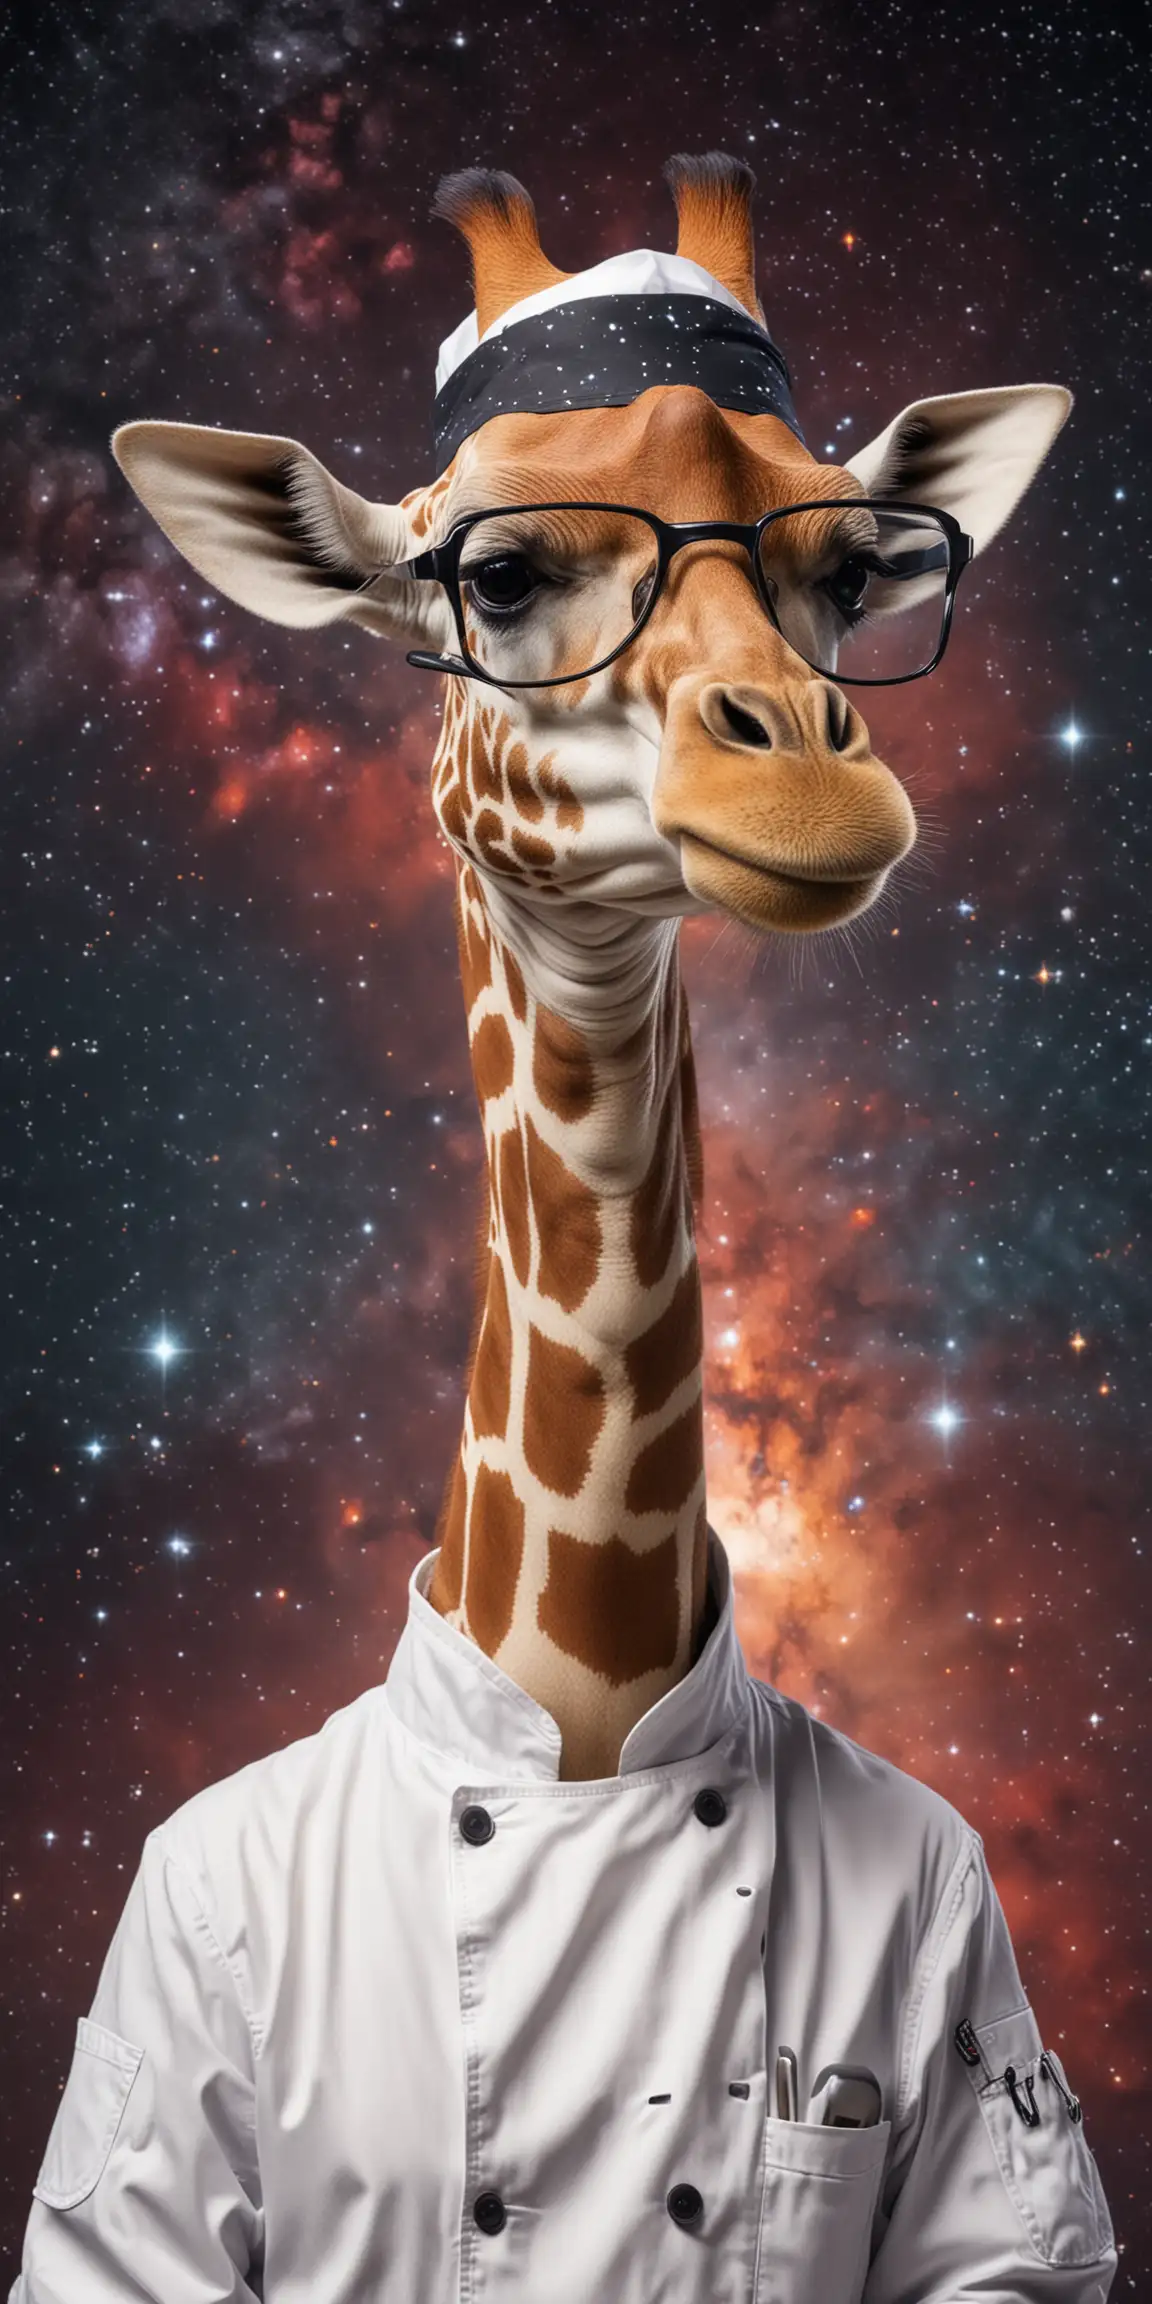 Giraffe with glasses dressed as a chef in the space